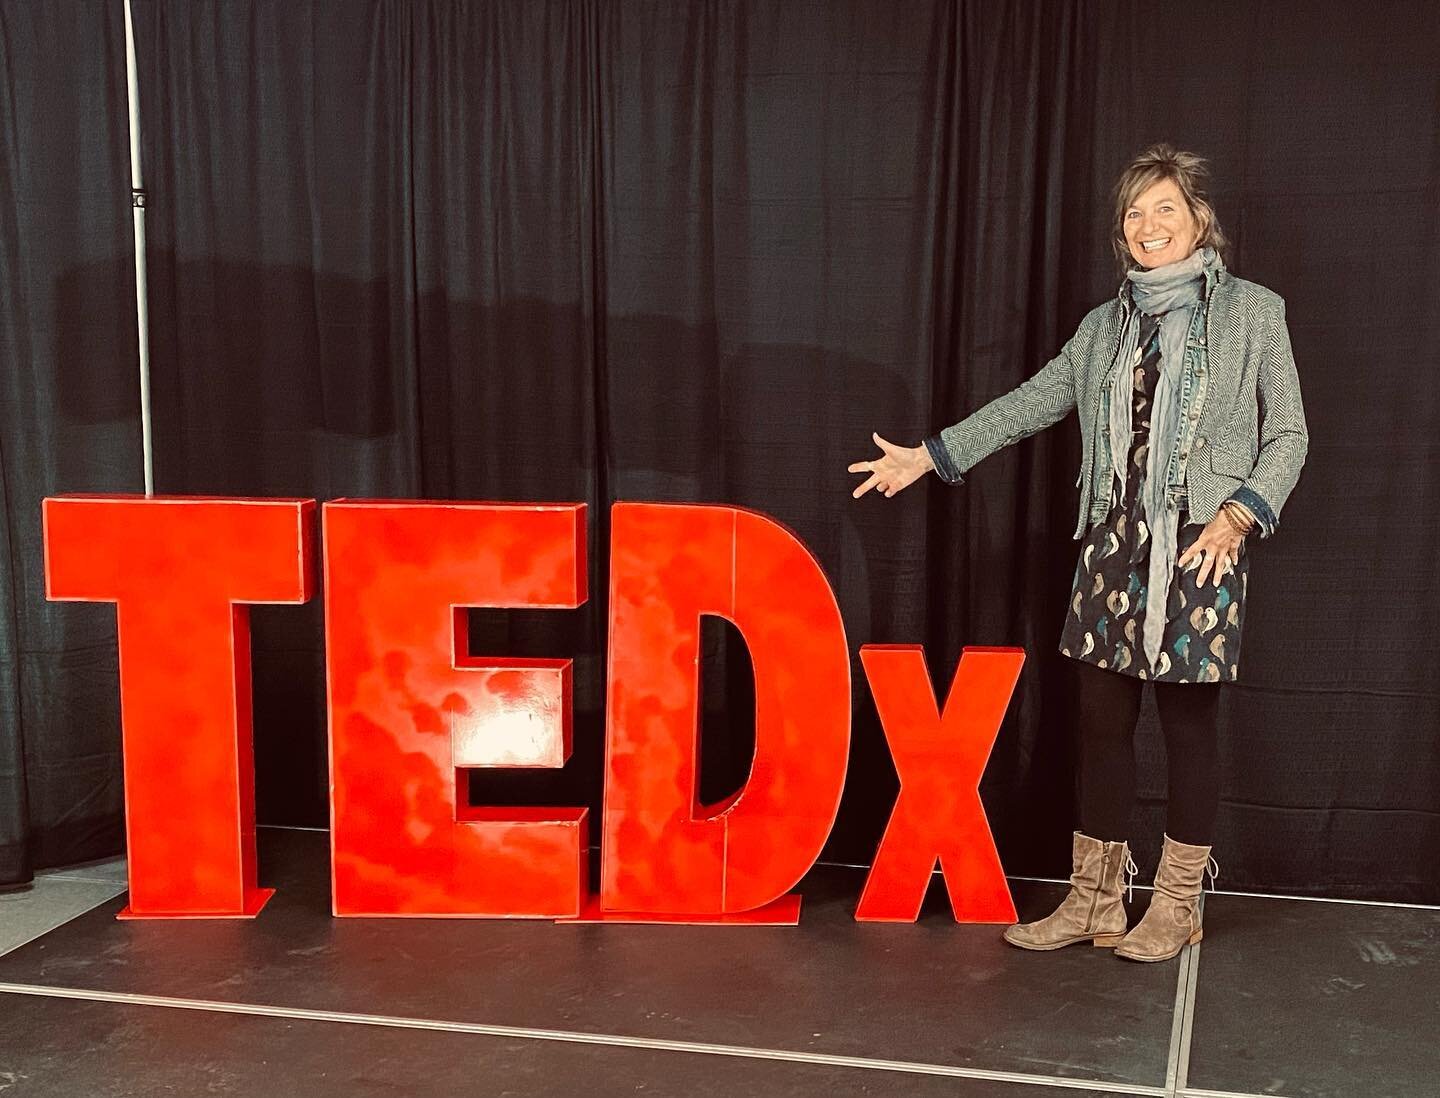 Defining moments. Stepping out of the comfort zone. Insane moments of courage. 

Call them whatever makes sense to you. It&rsquo;s when we do them that make us feel alive. 

Today was practice day for @tedxhawkesbury. I was surrounded by amazing huma